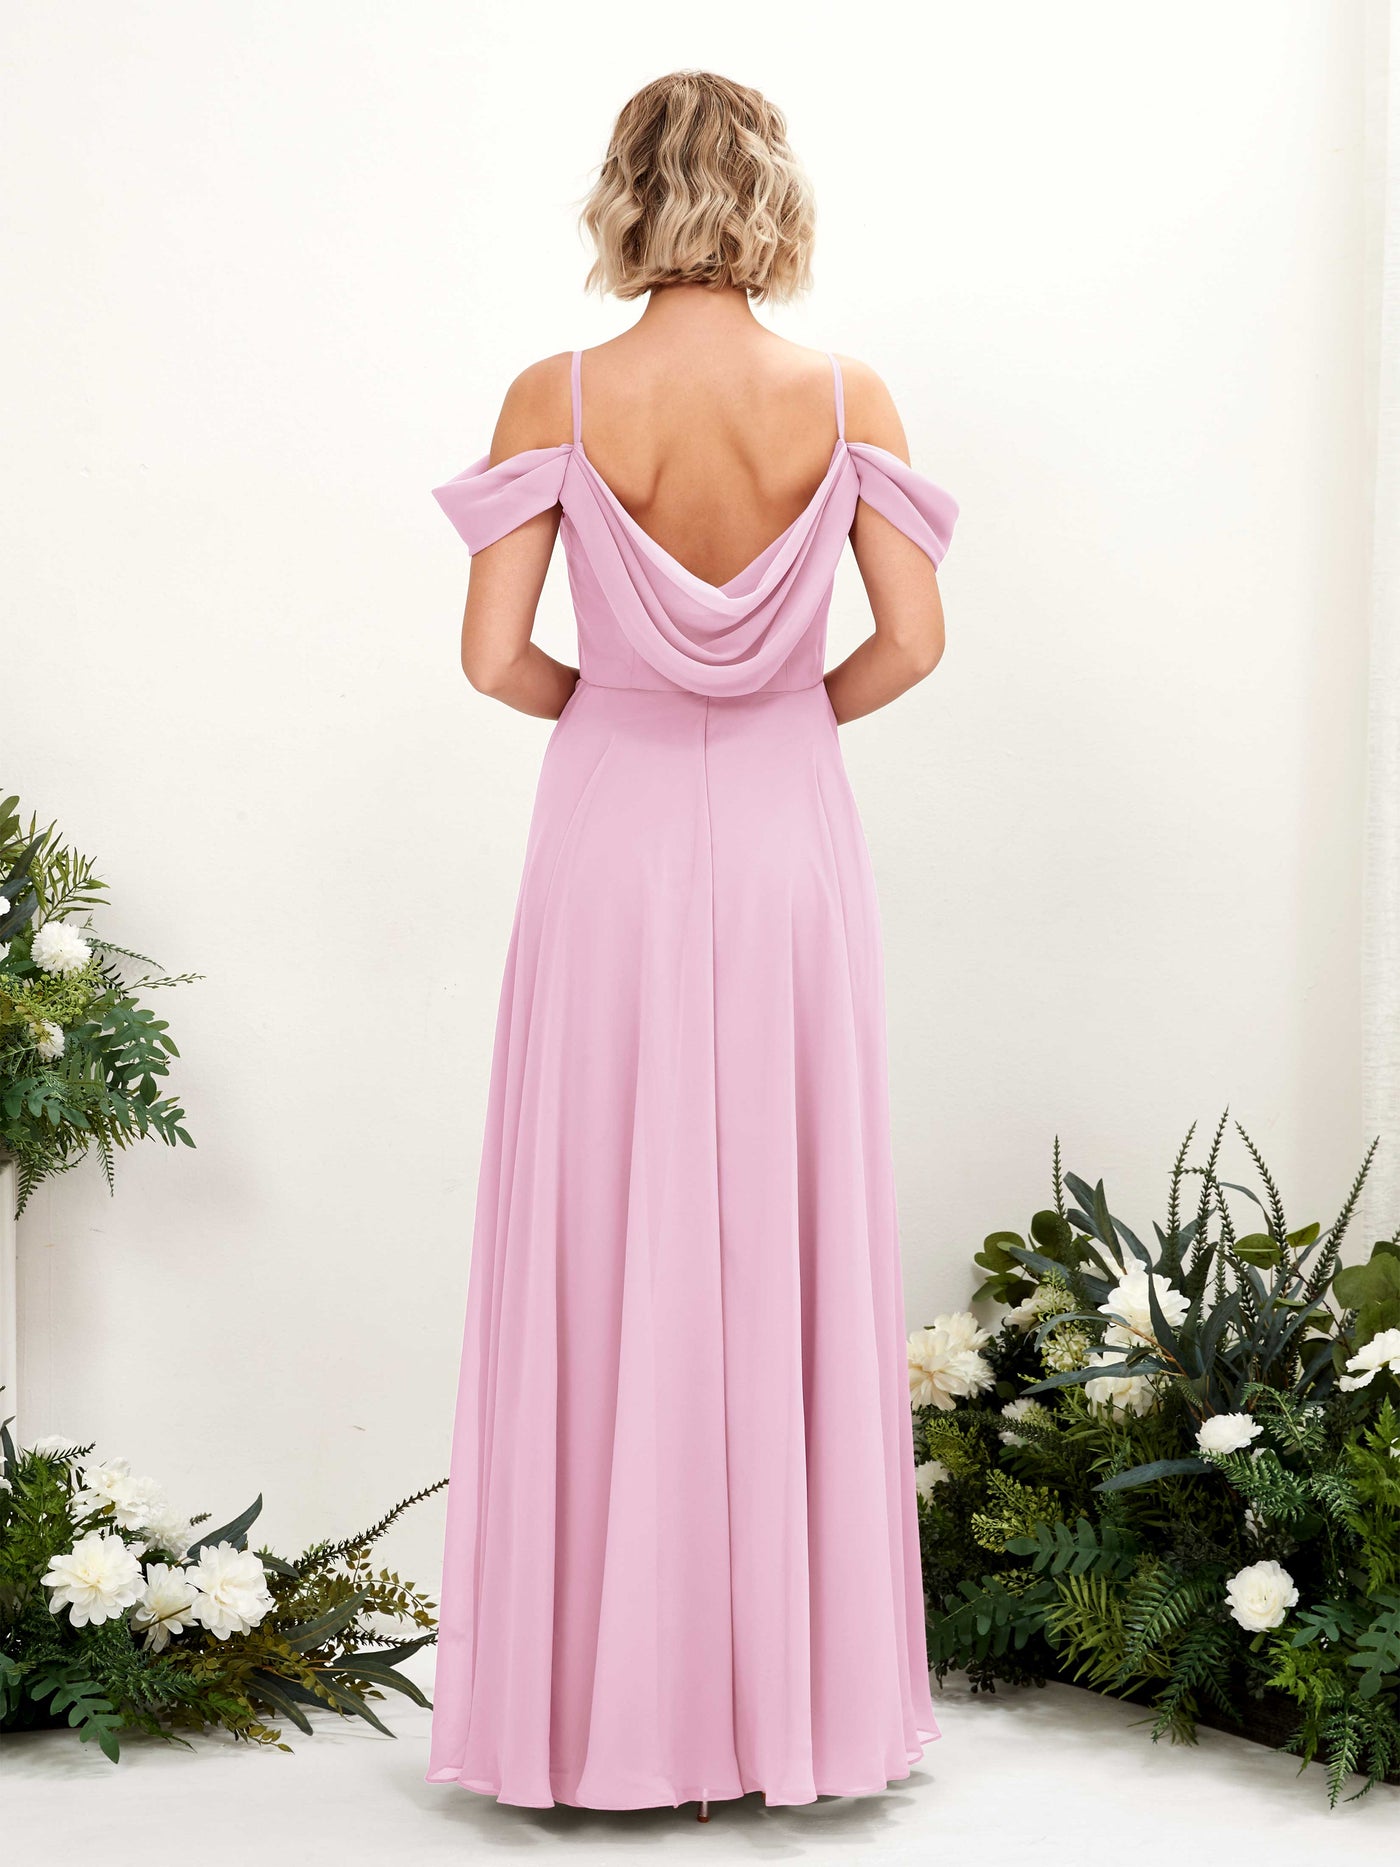 Candy Pink Bridesmaid Dresses Bridesmaid Dress A-line Chiffon Off Shoulder Full Length Sleeveless Wedding Party Dress (81224939)#color_candy-pink